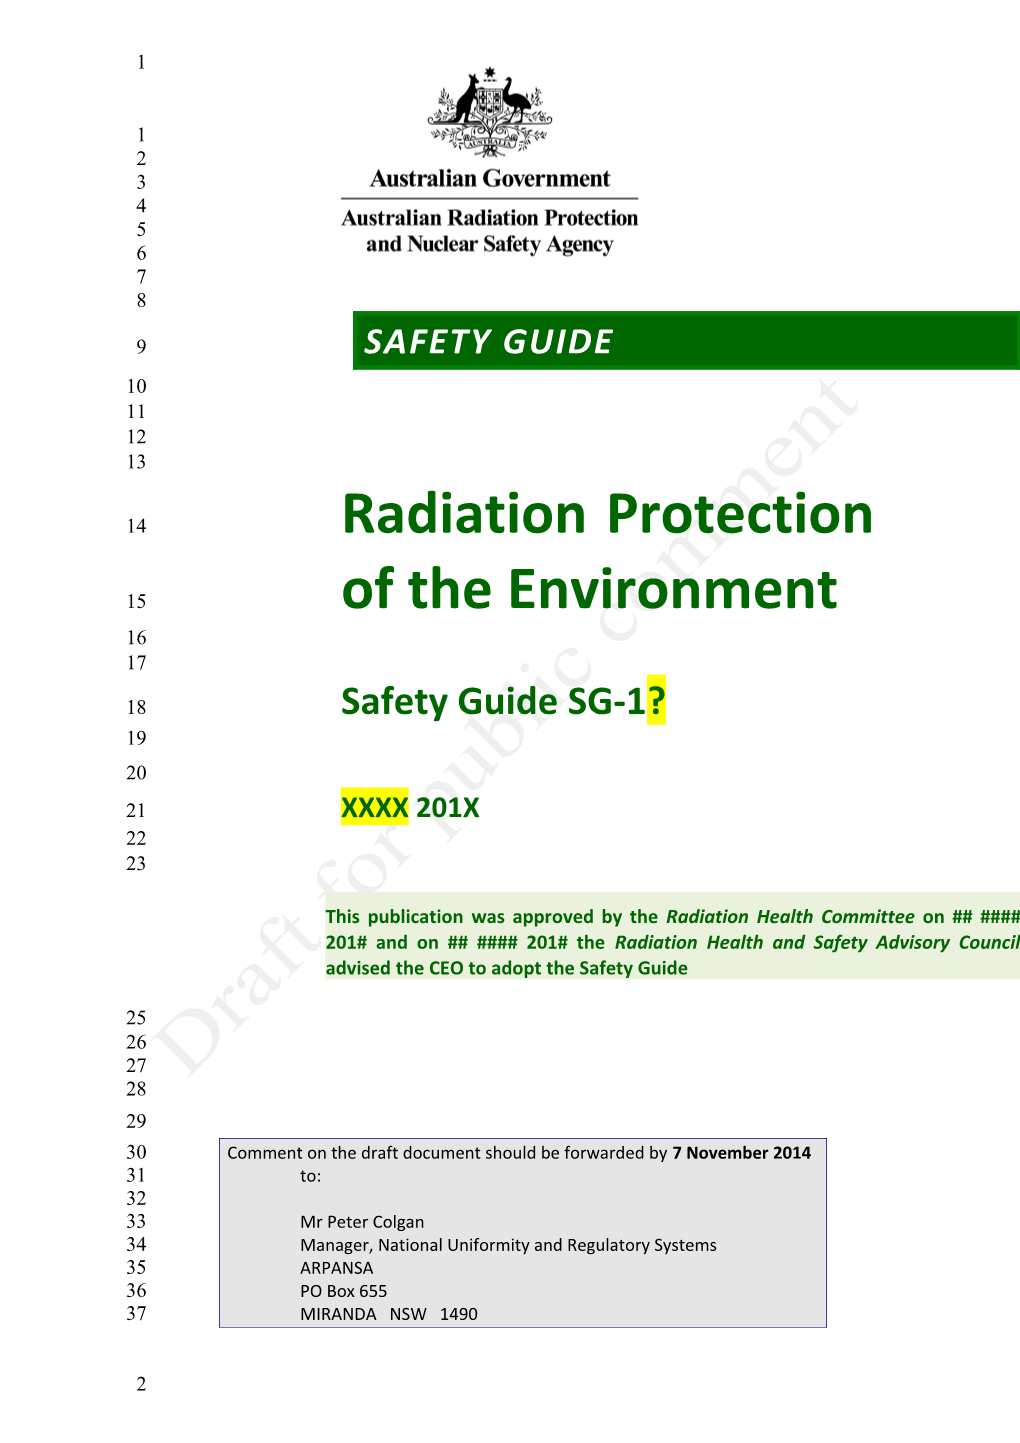 Draft Safety Guide - Radiation Protection of the Environment